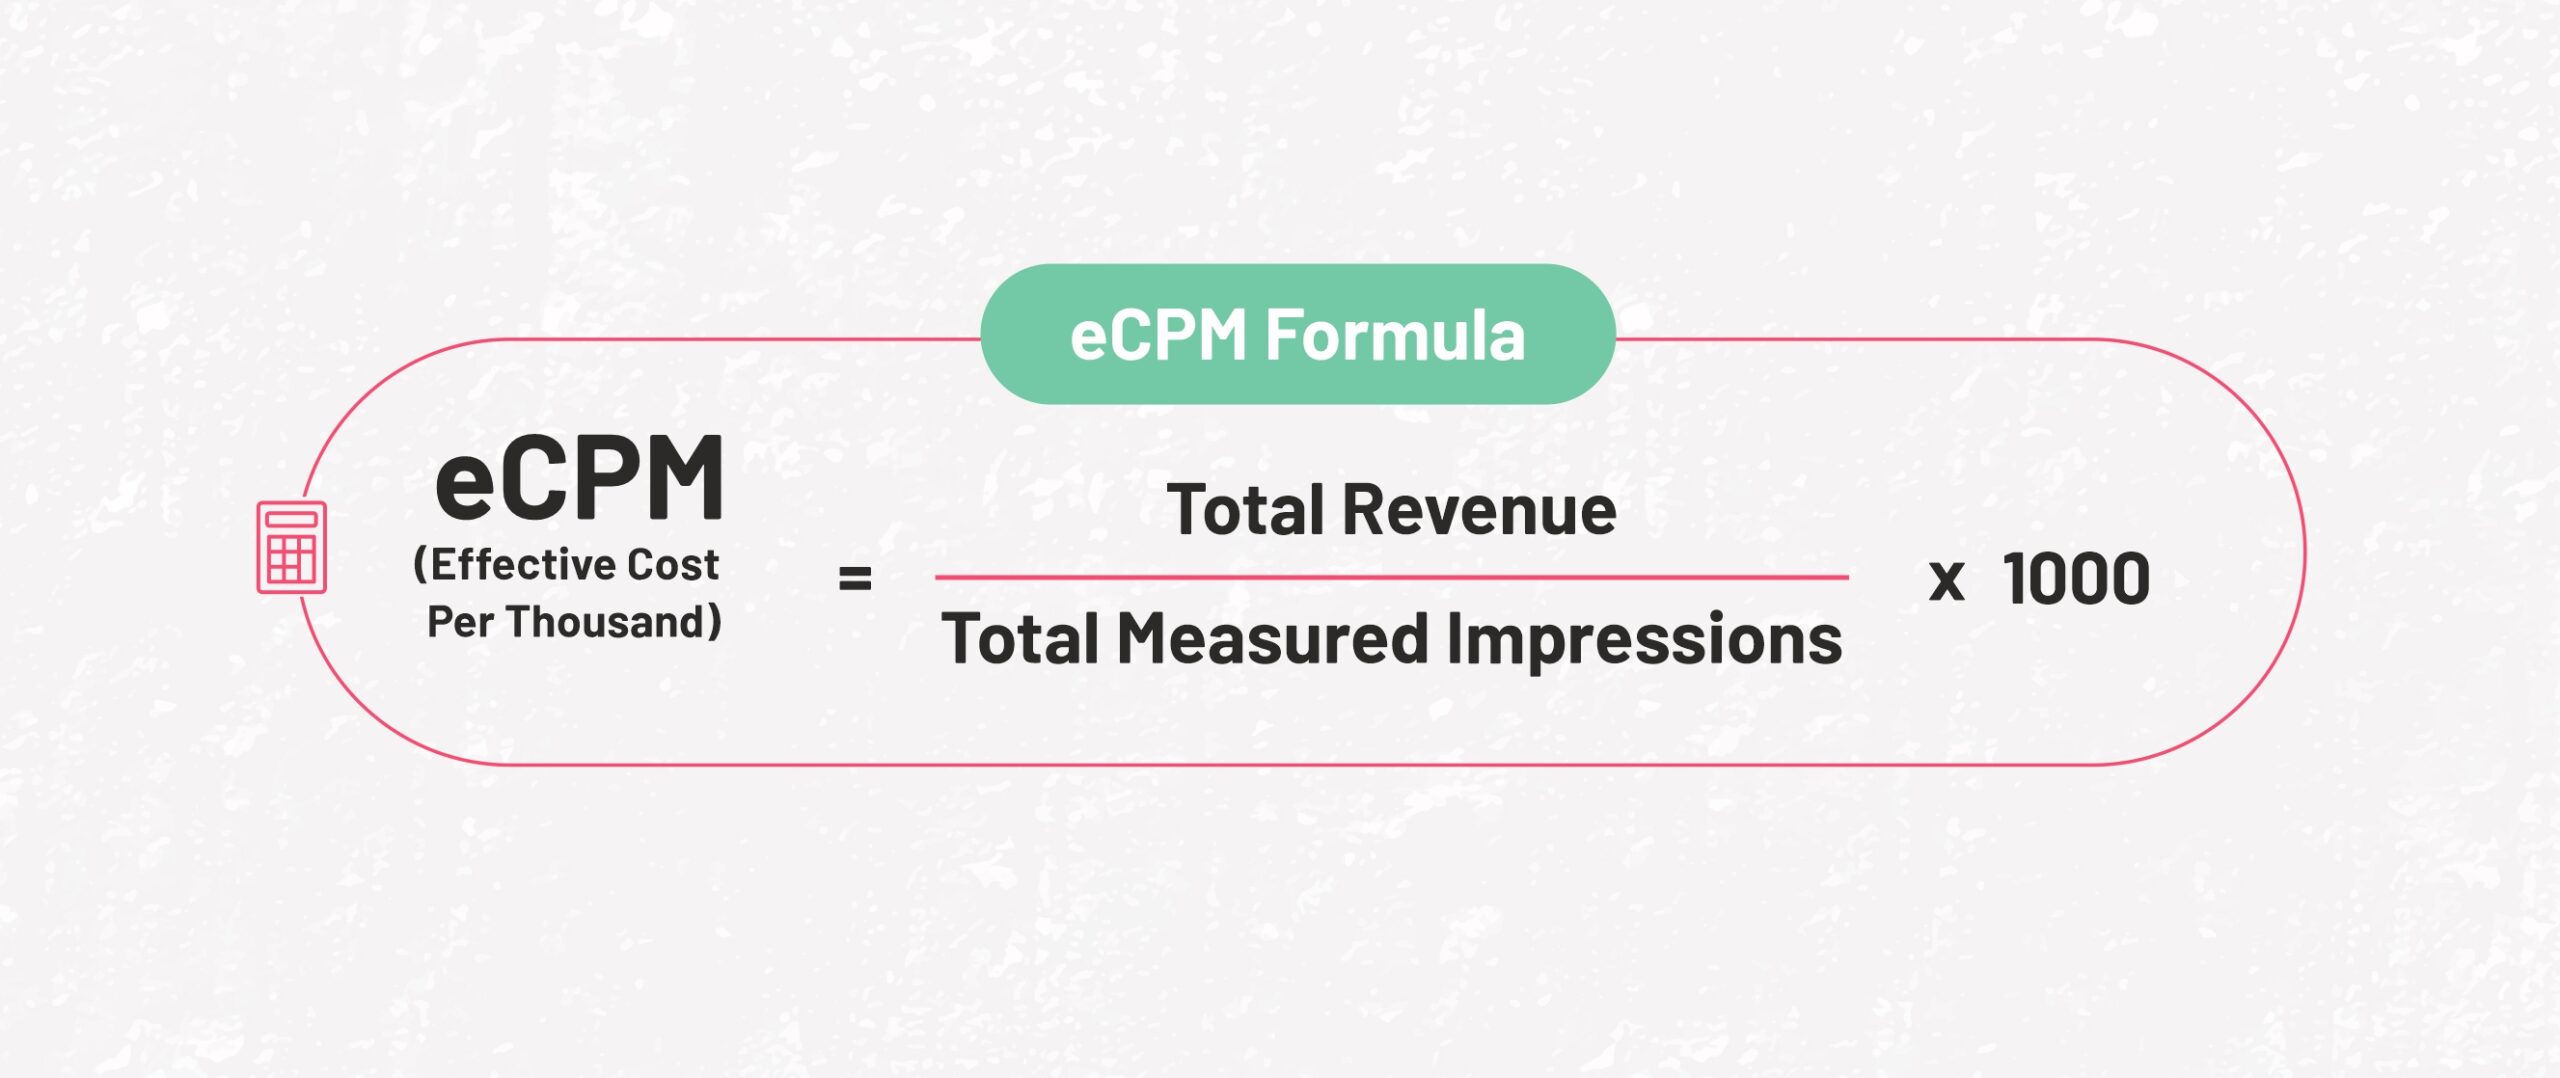 RPM vs CPM Formula on : Differences & Examples